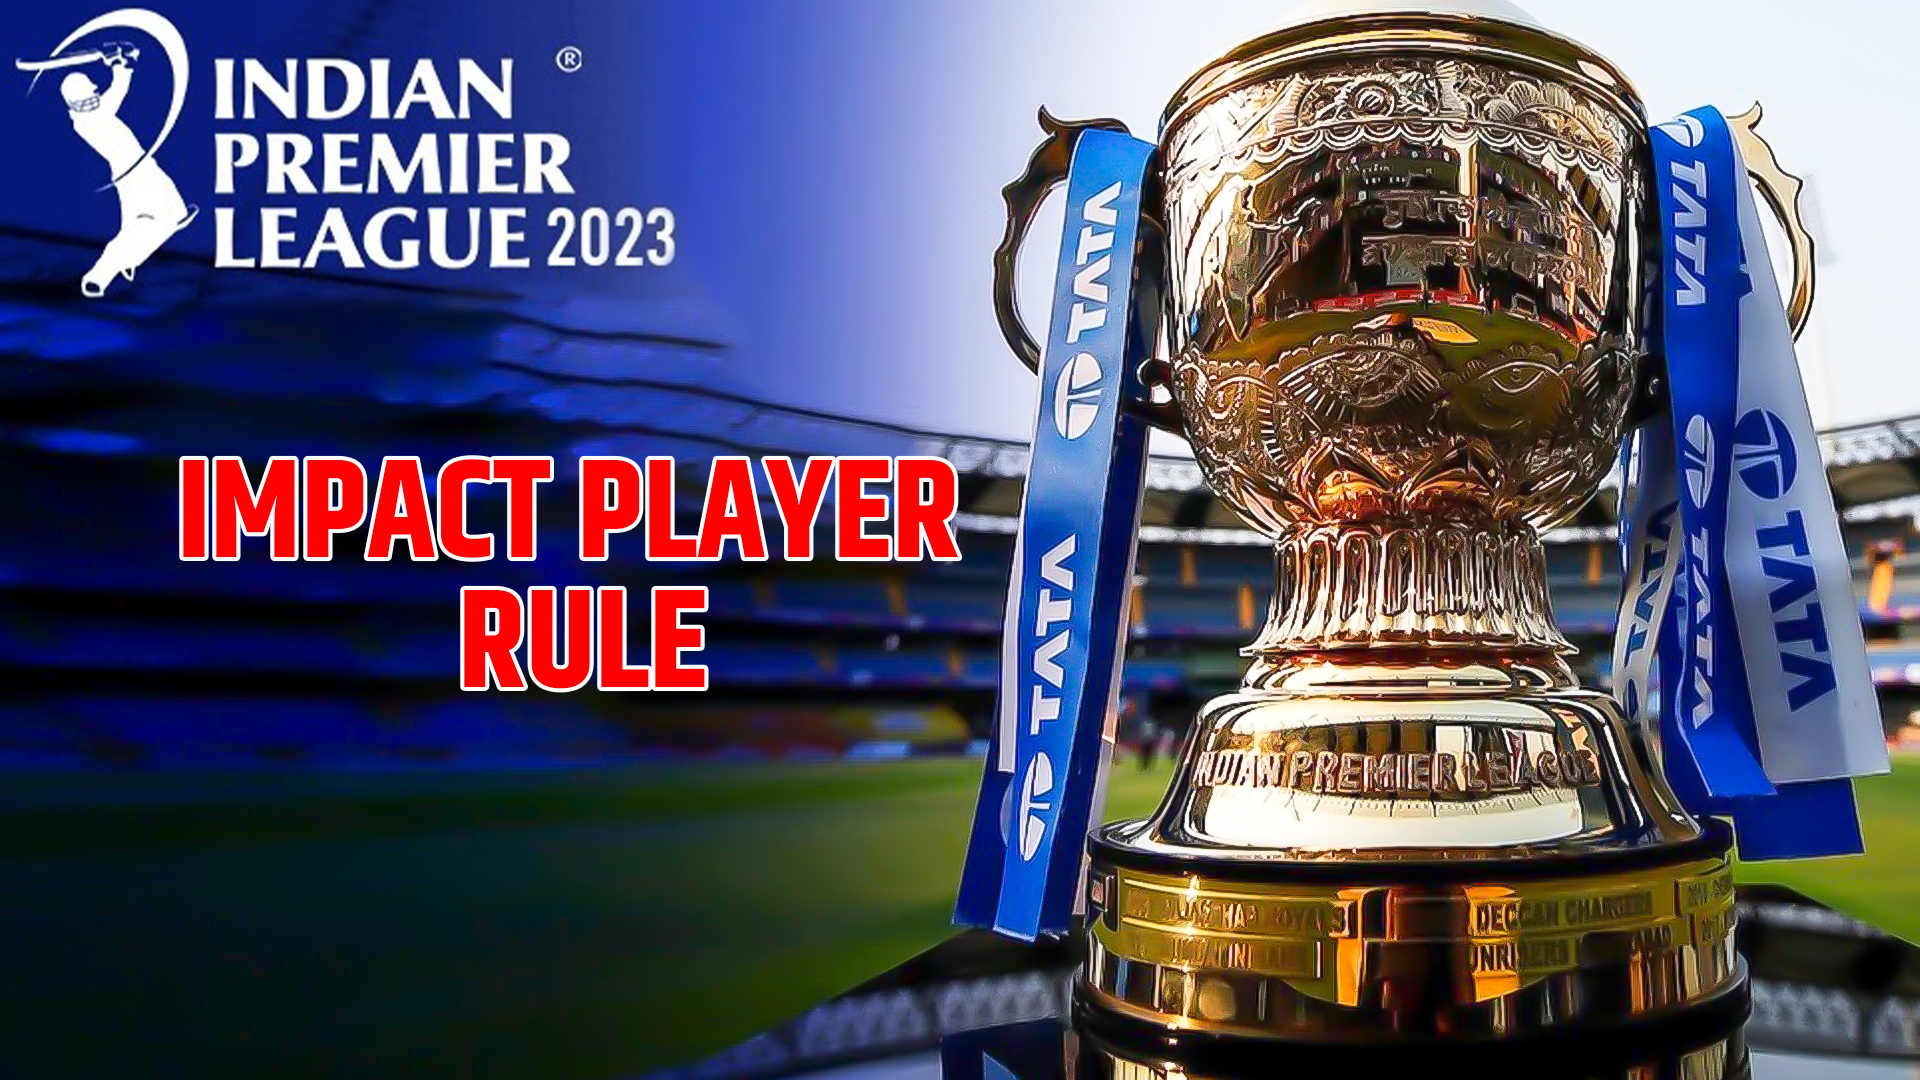 "Impact Player" Rule Explained By BCCI, That Will Be Applied In The IPL